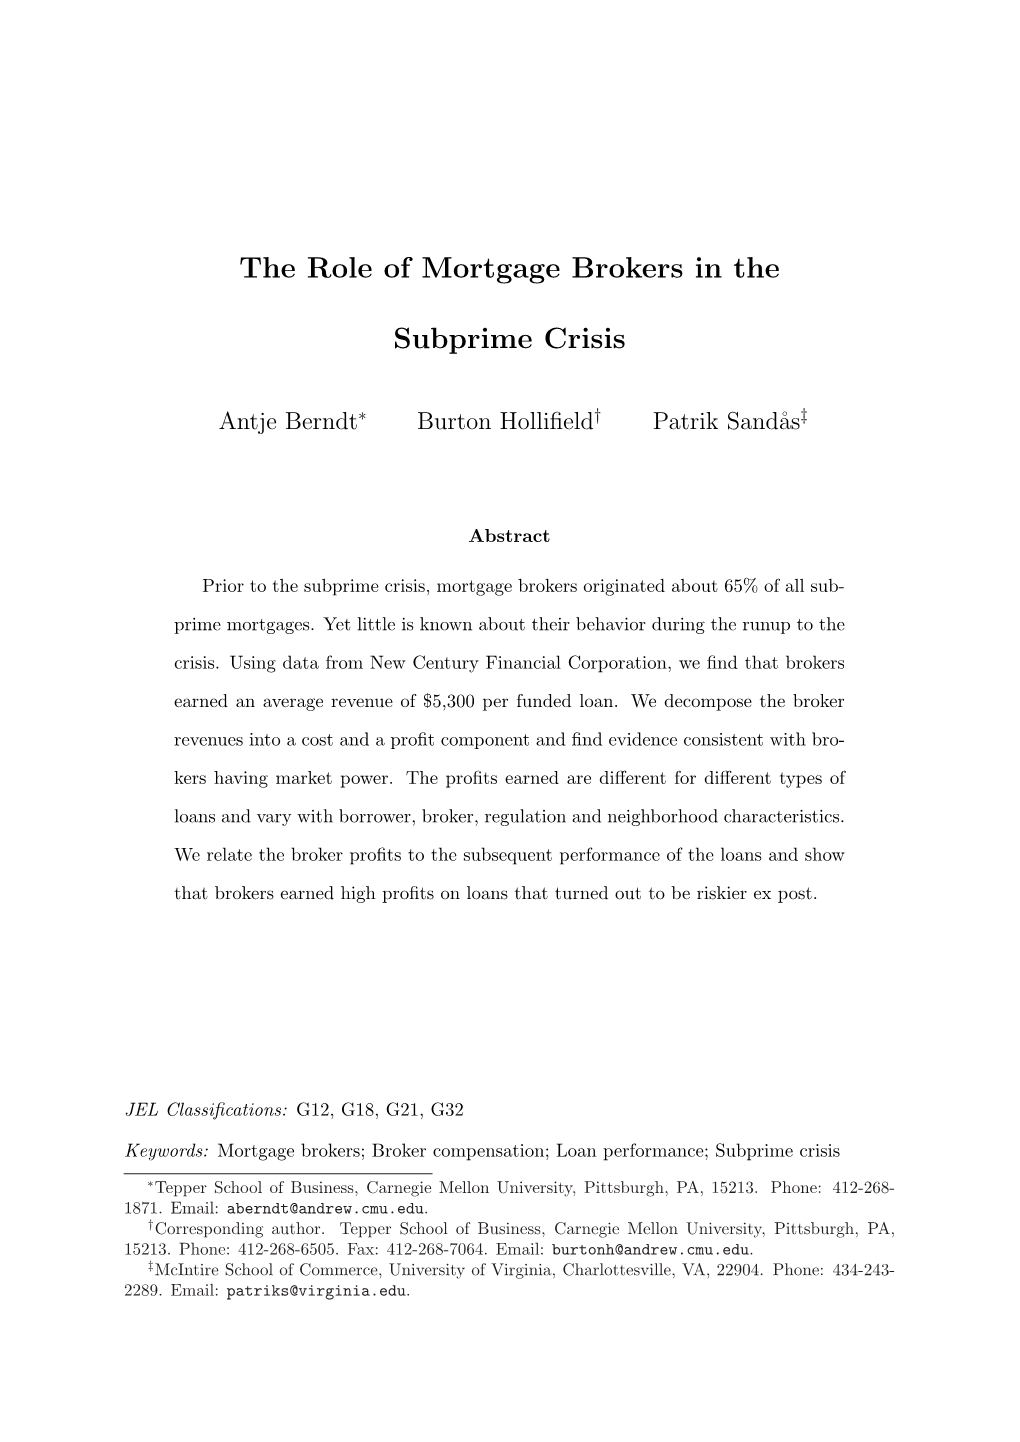 The Role of Mortgage Brokers in the Subprime Crisis